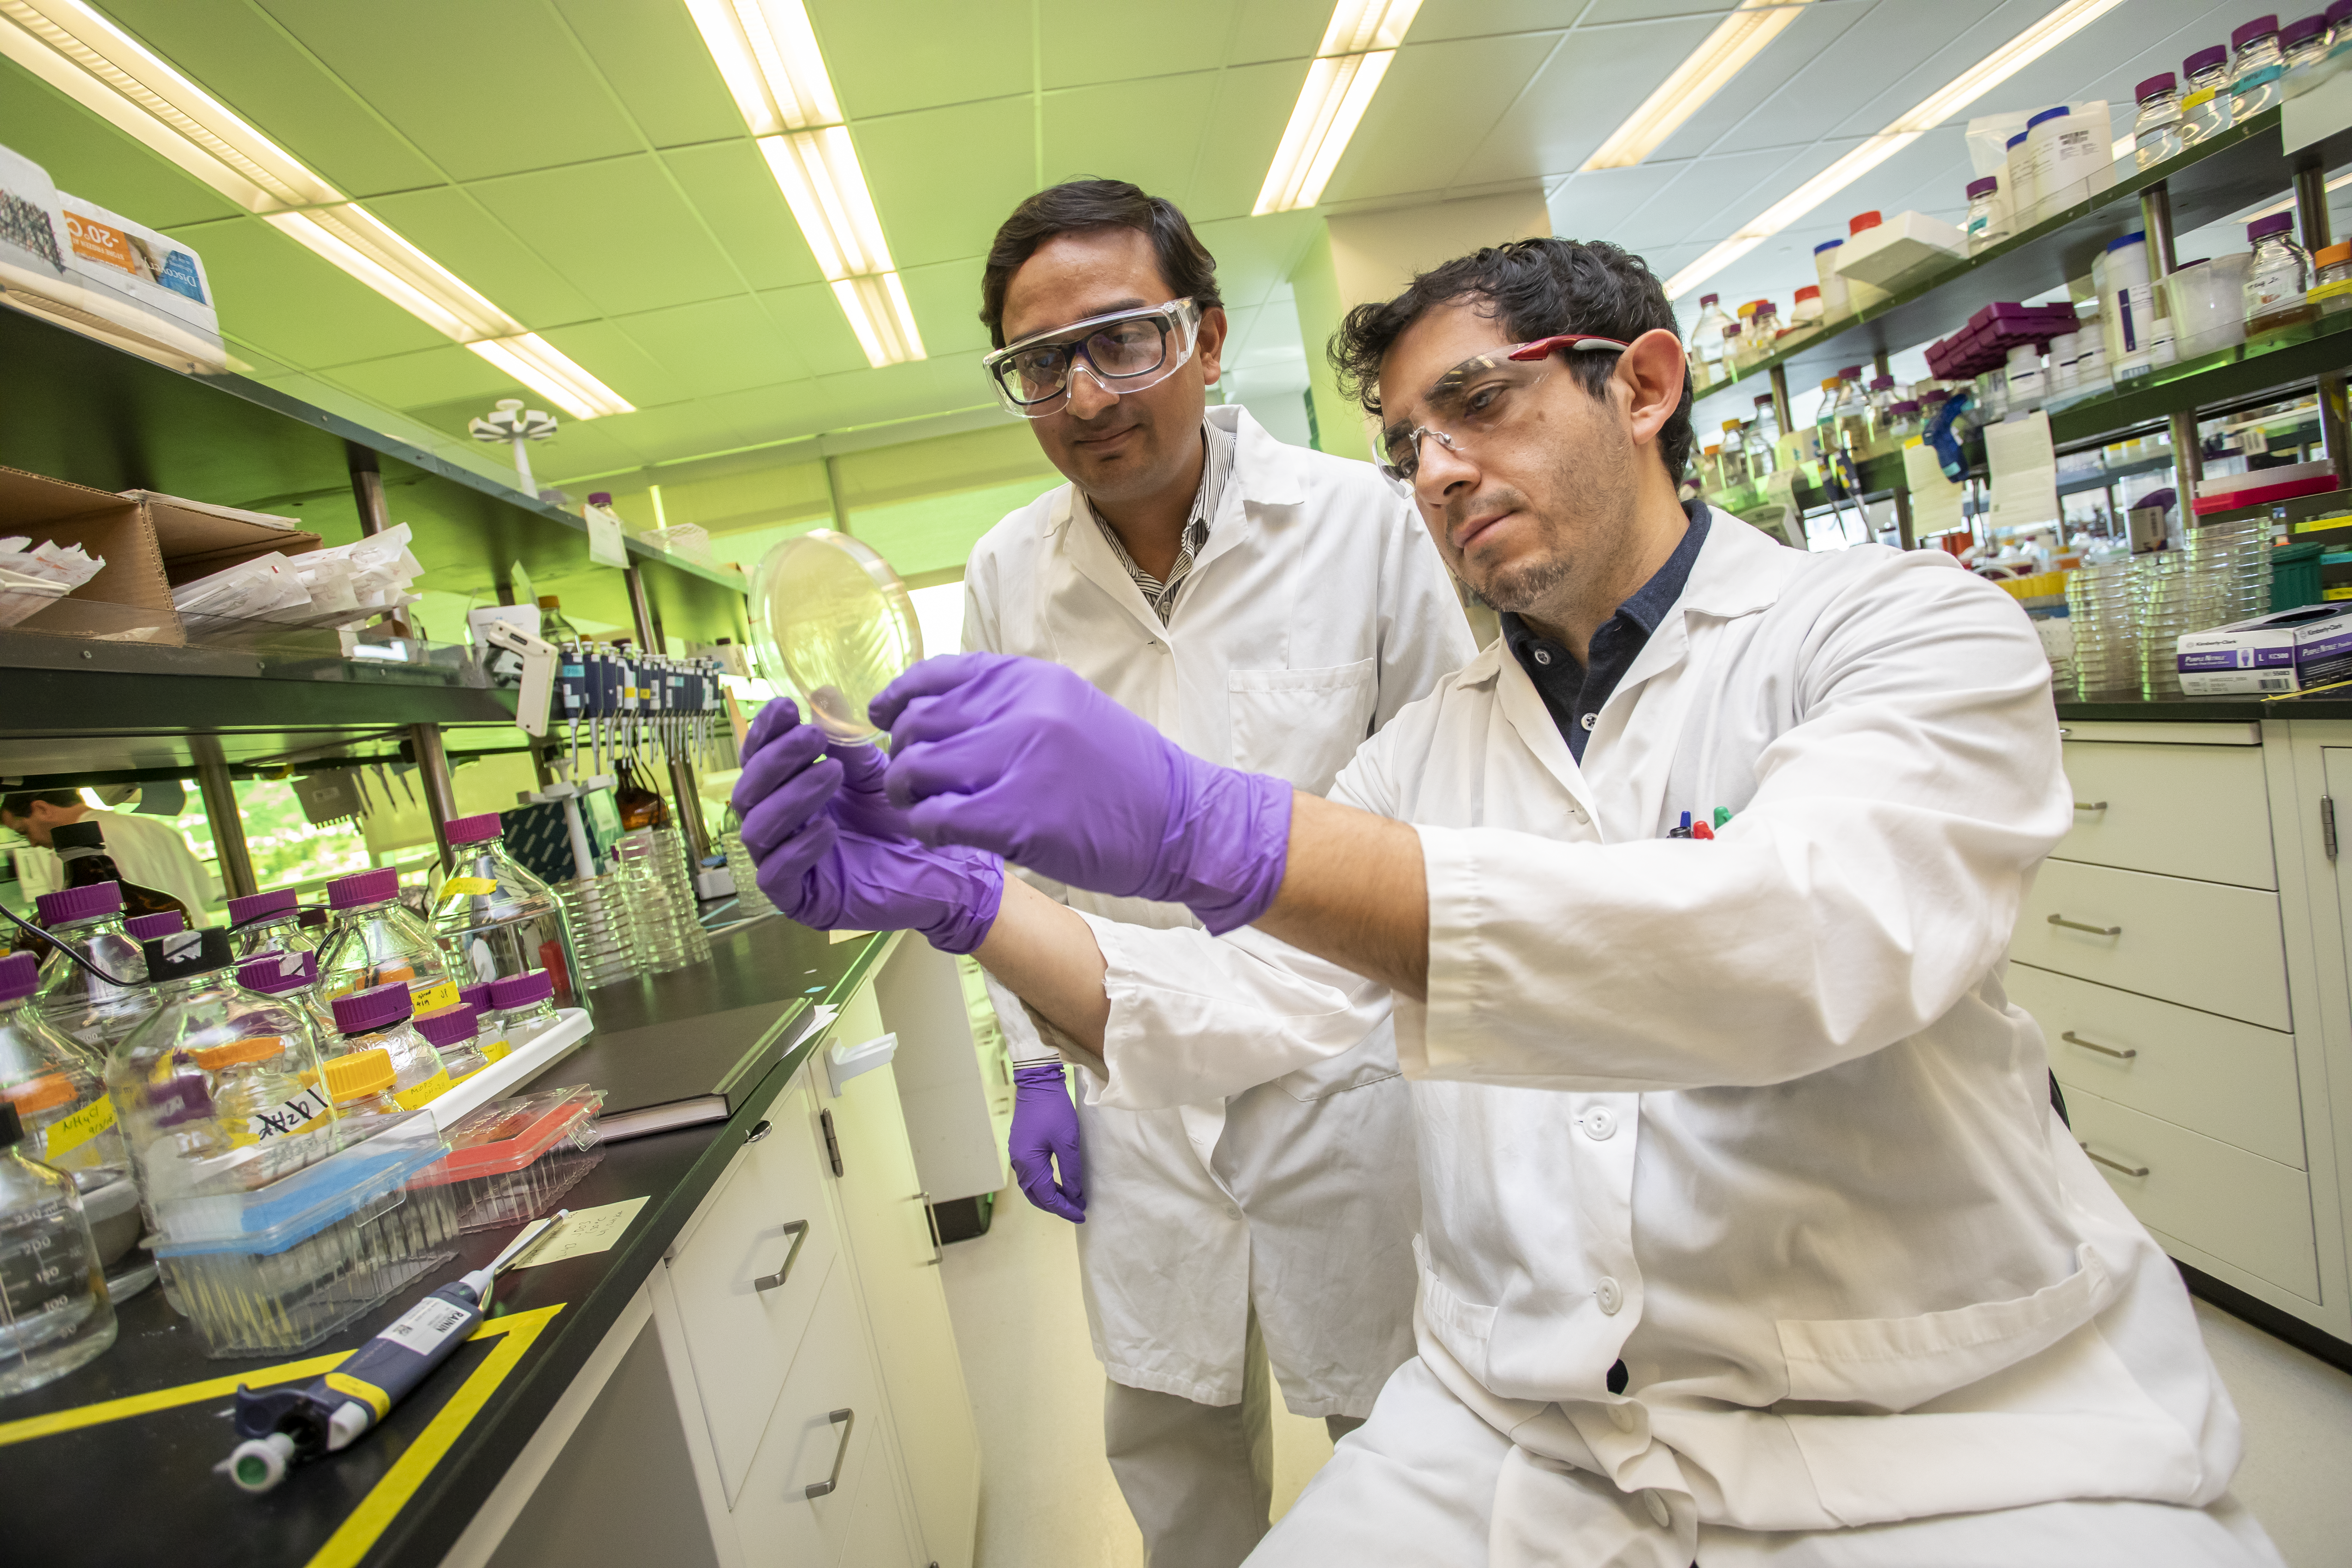 Project Scientist Daniel Mendez and Postdoc Nawa Baral work on samples at JBEI